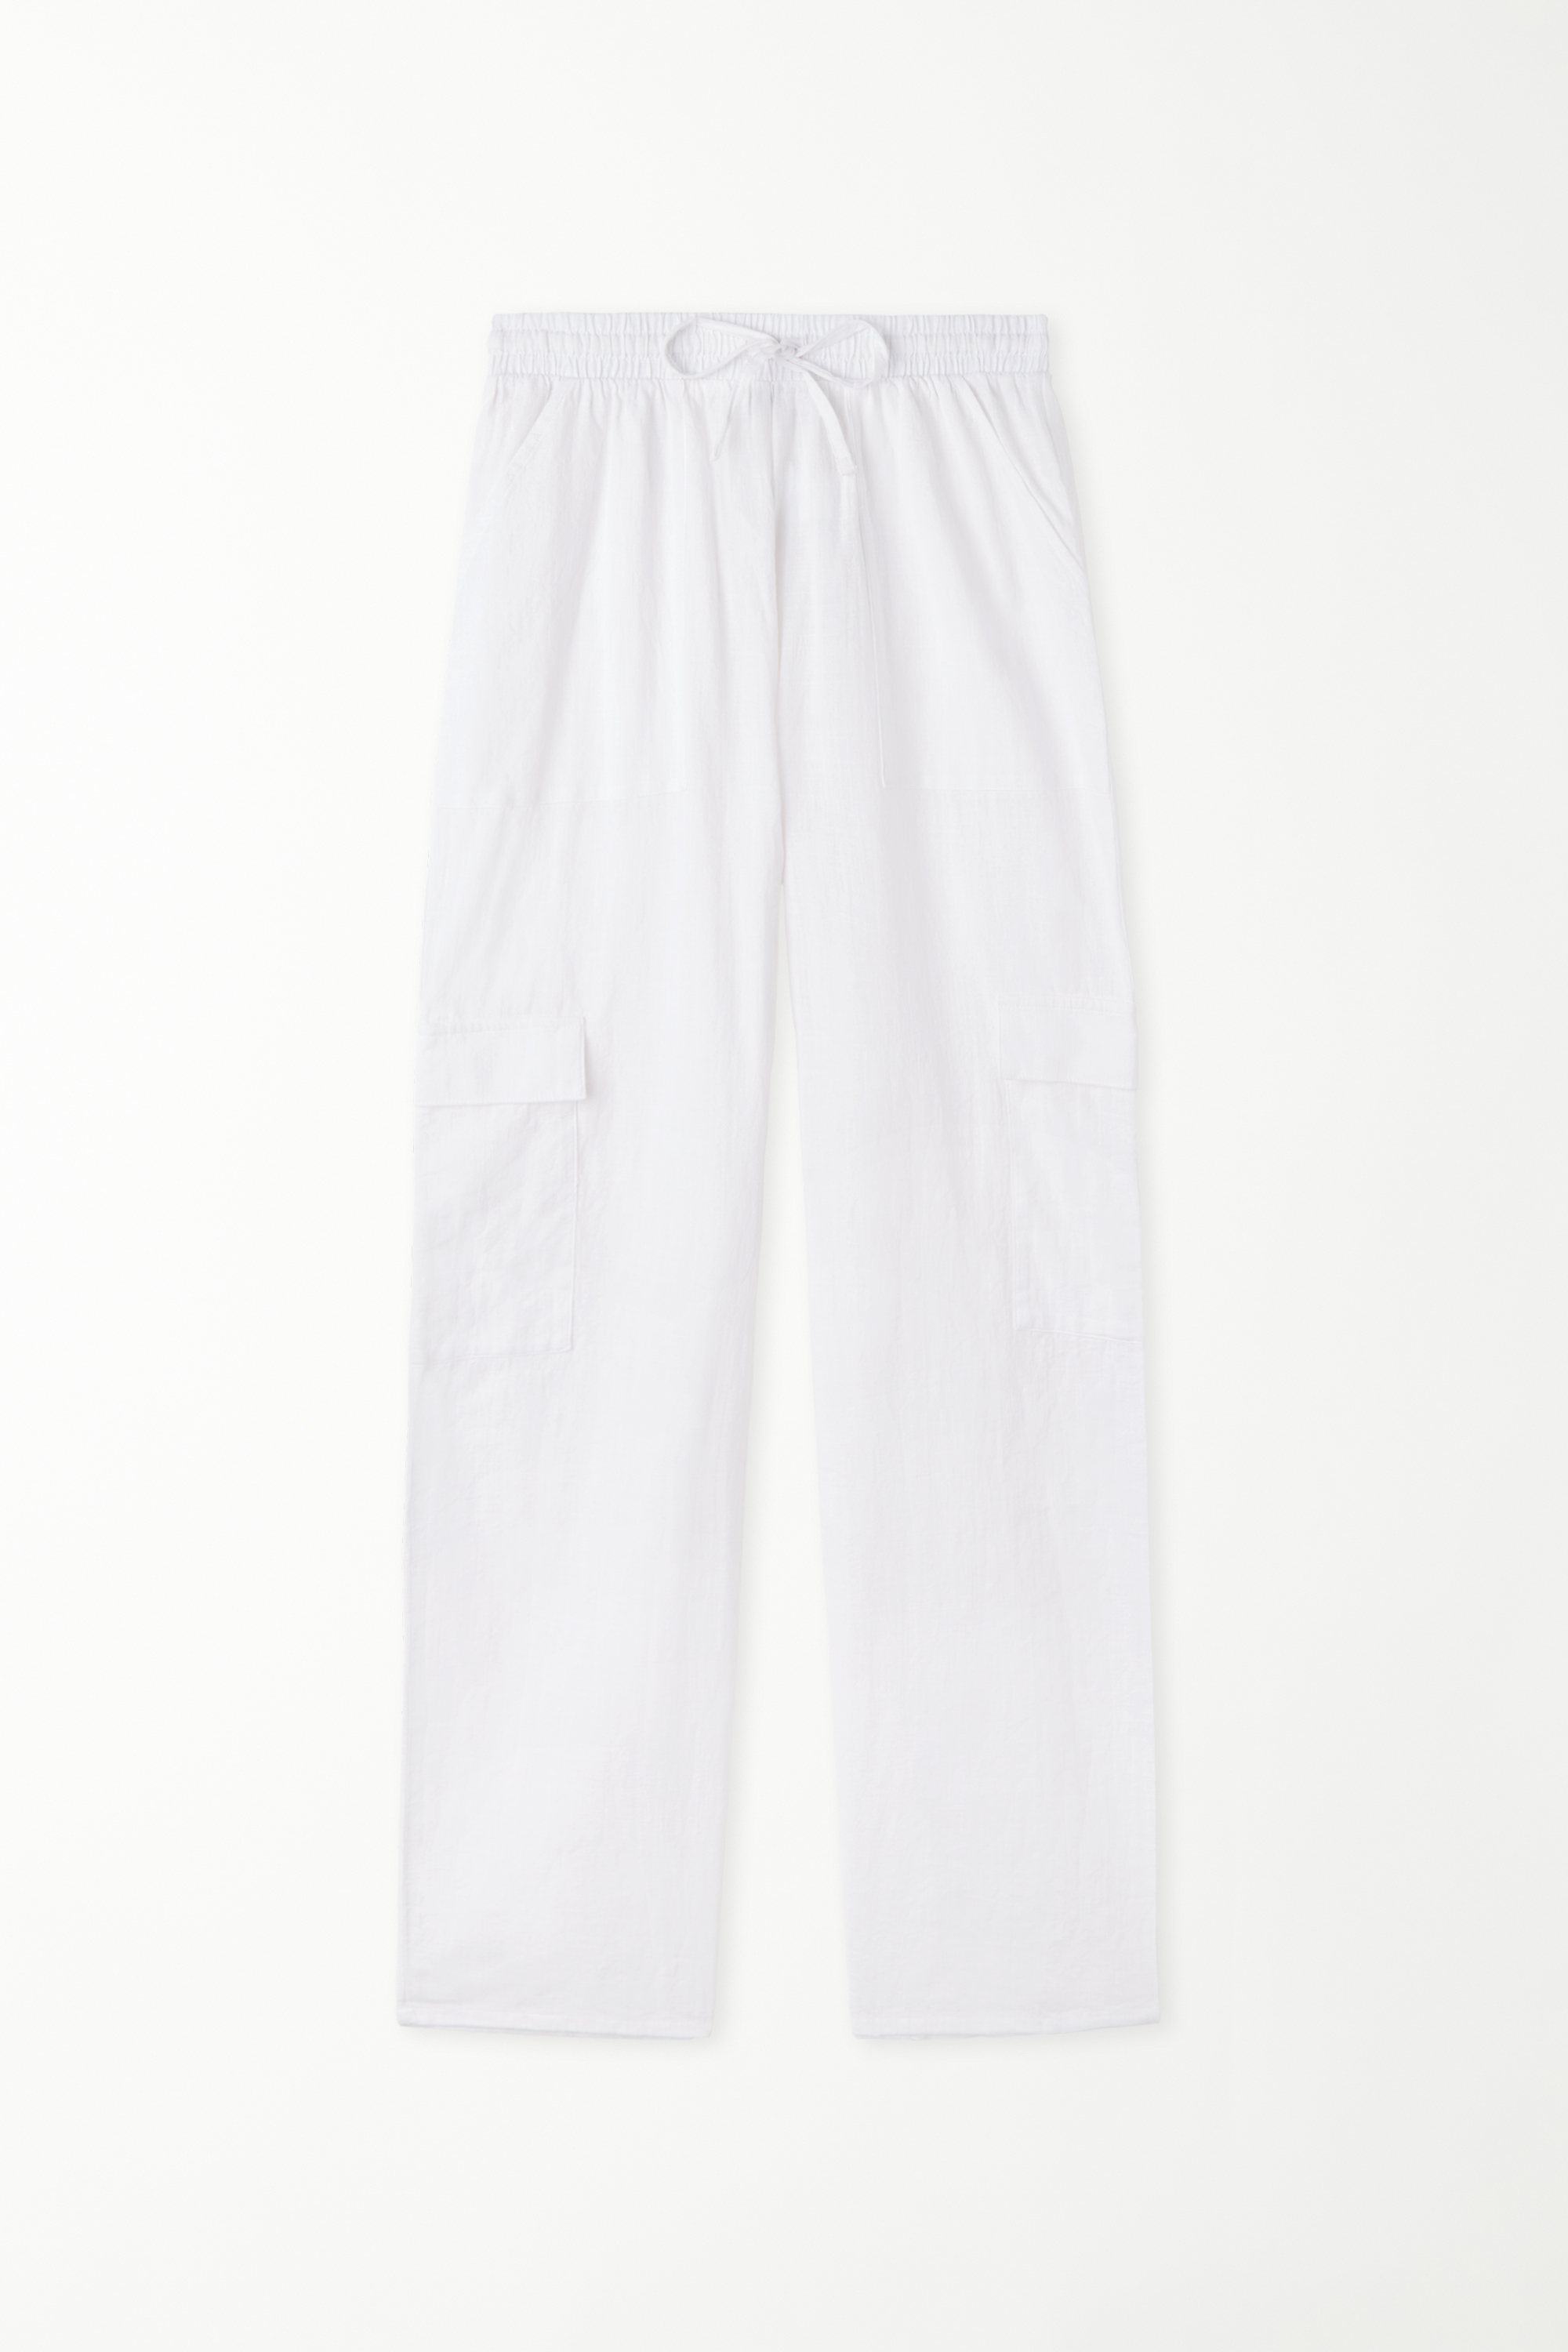 Super Light Cotton Trousers with Cargo Pockets